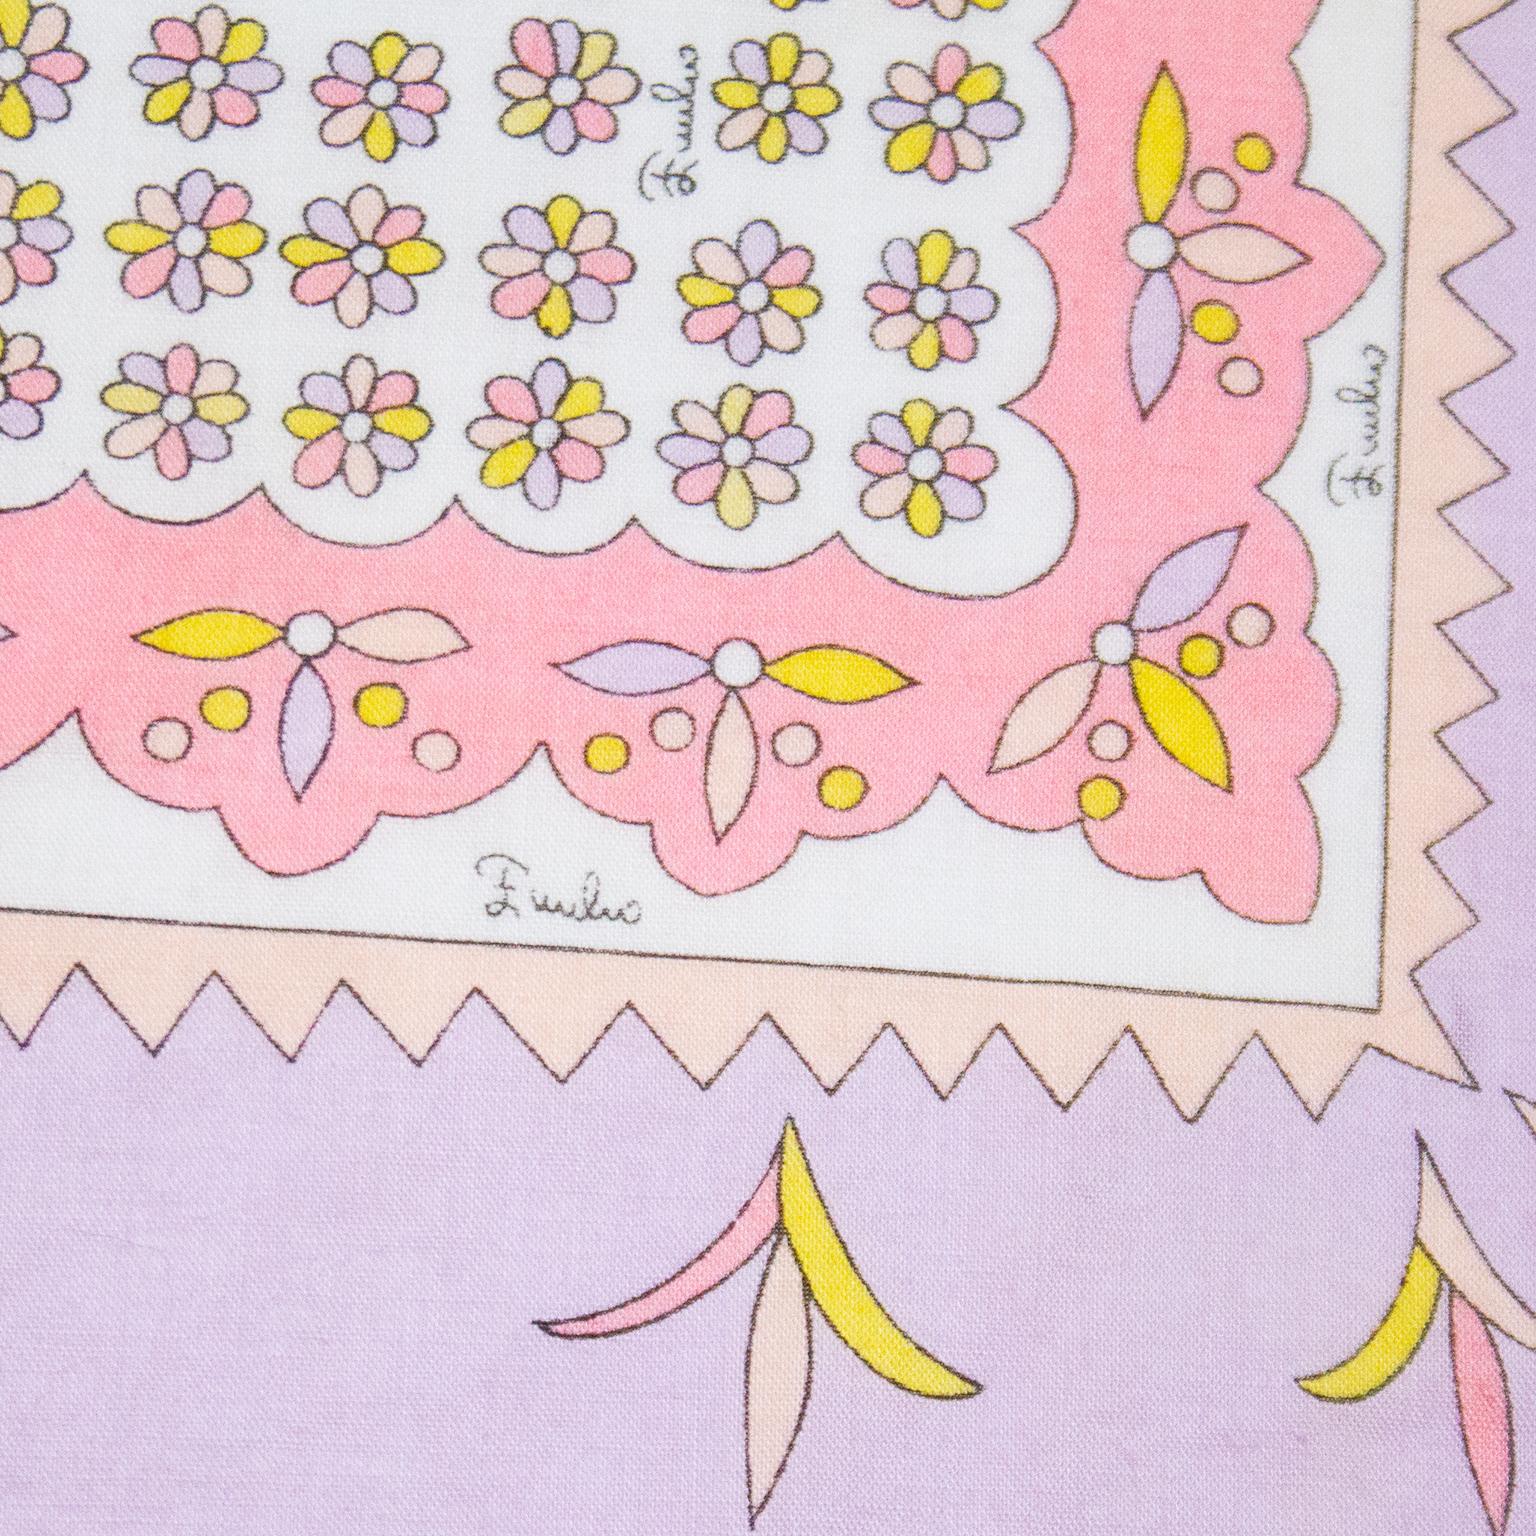 Darling Emilio Pucci cotton flower print scarf from the 1970s. Such a stunning pastel color combination of lavender, pinks, yellow and white. Square shape. Brand signature throughout fabric. Perfect summer scarf, tie around the neck, around your